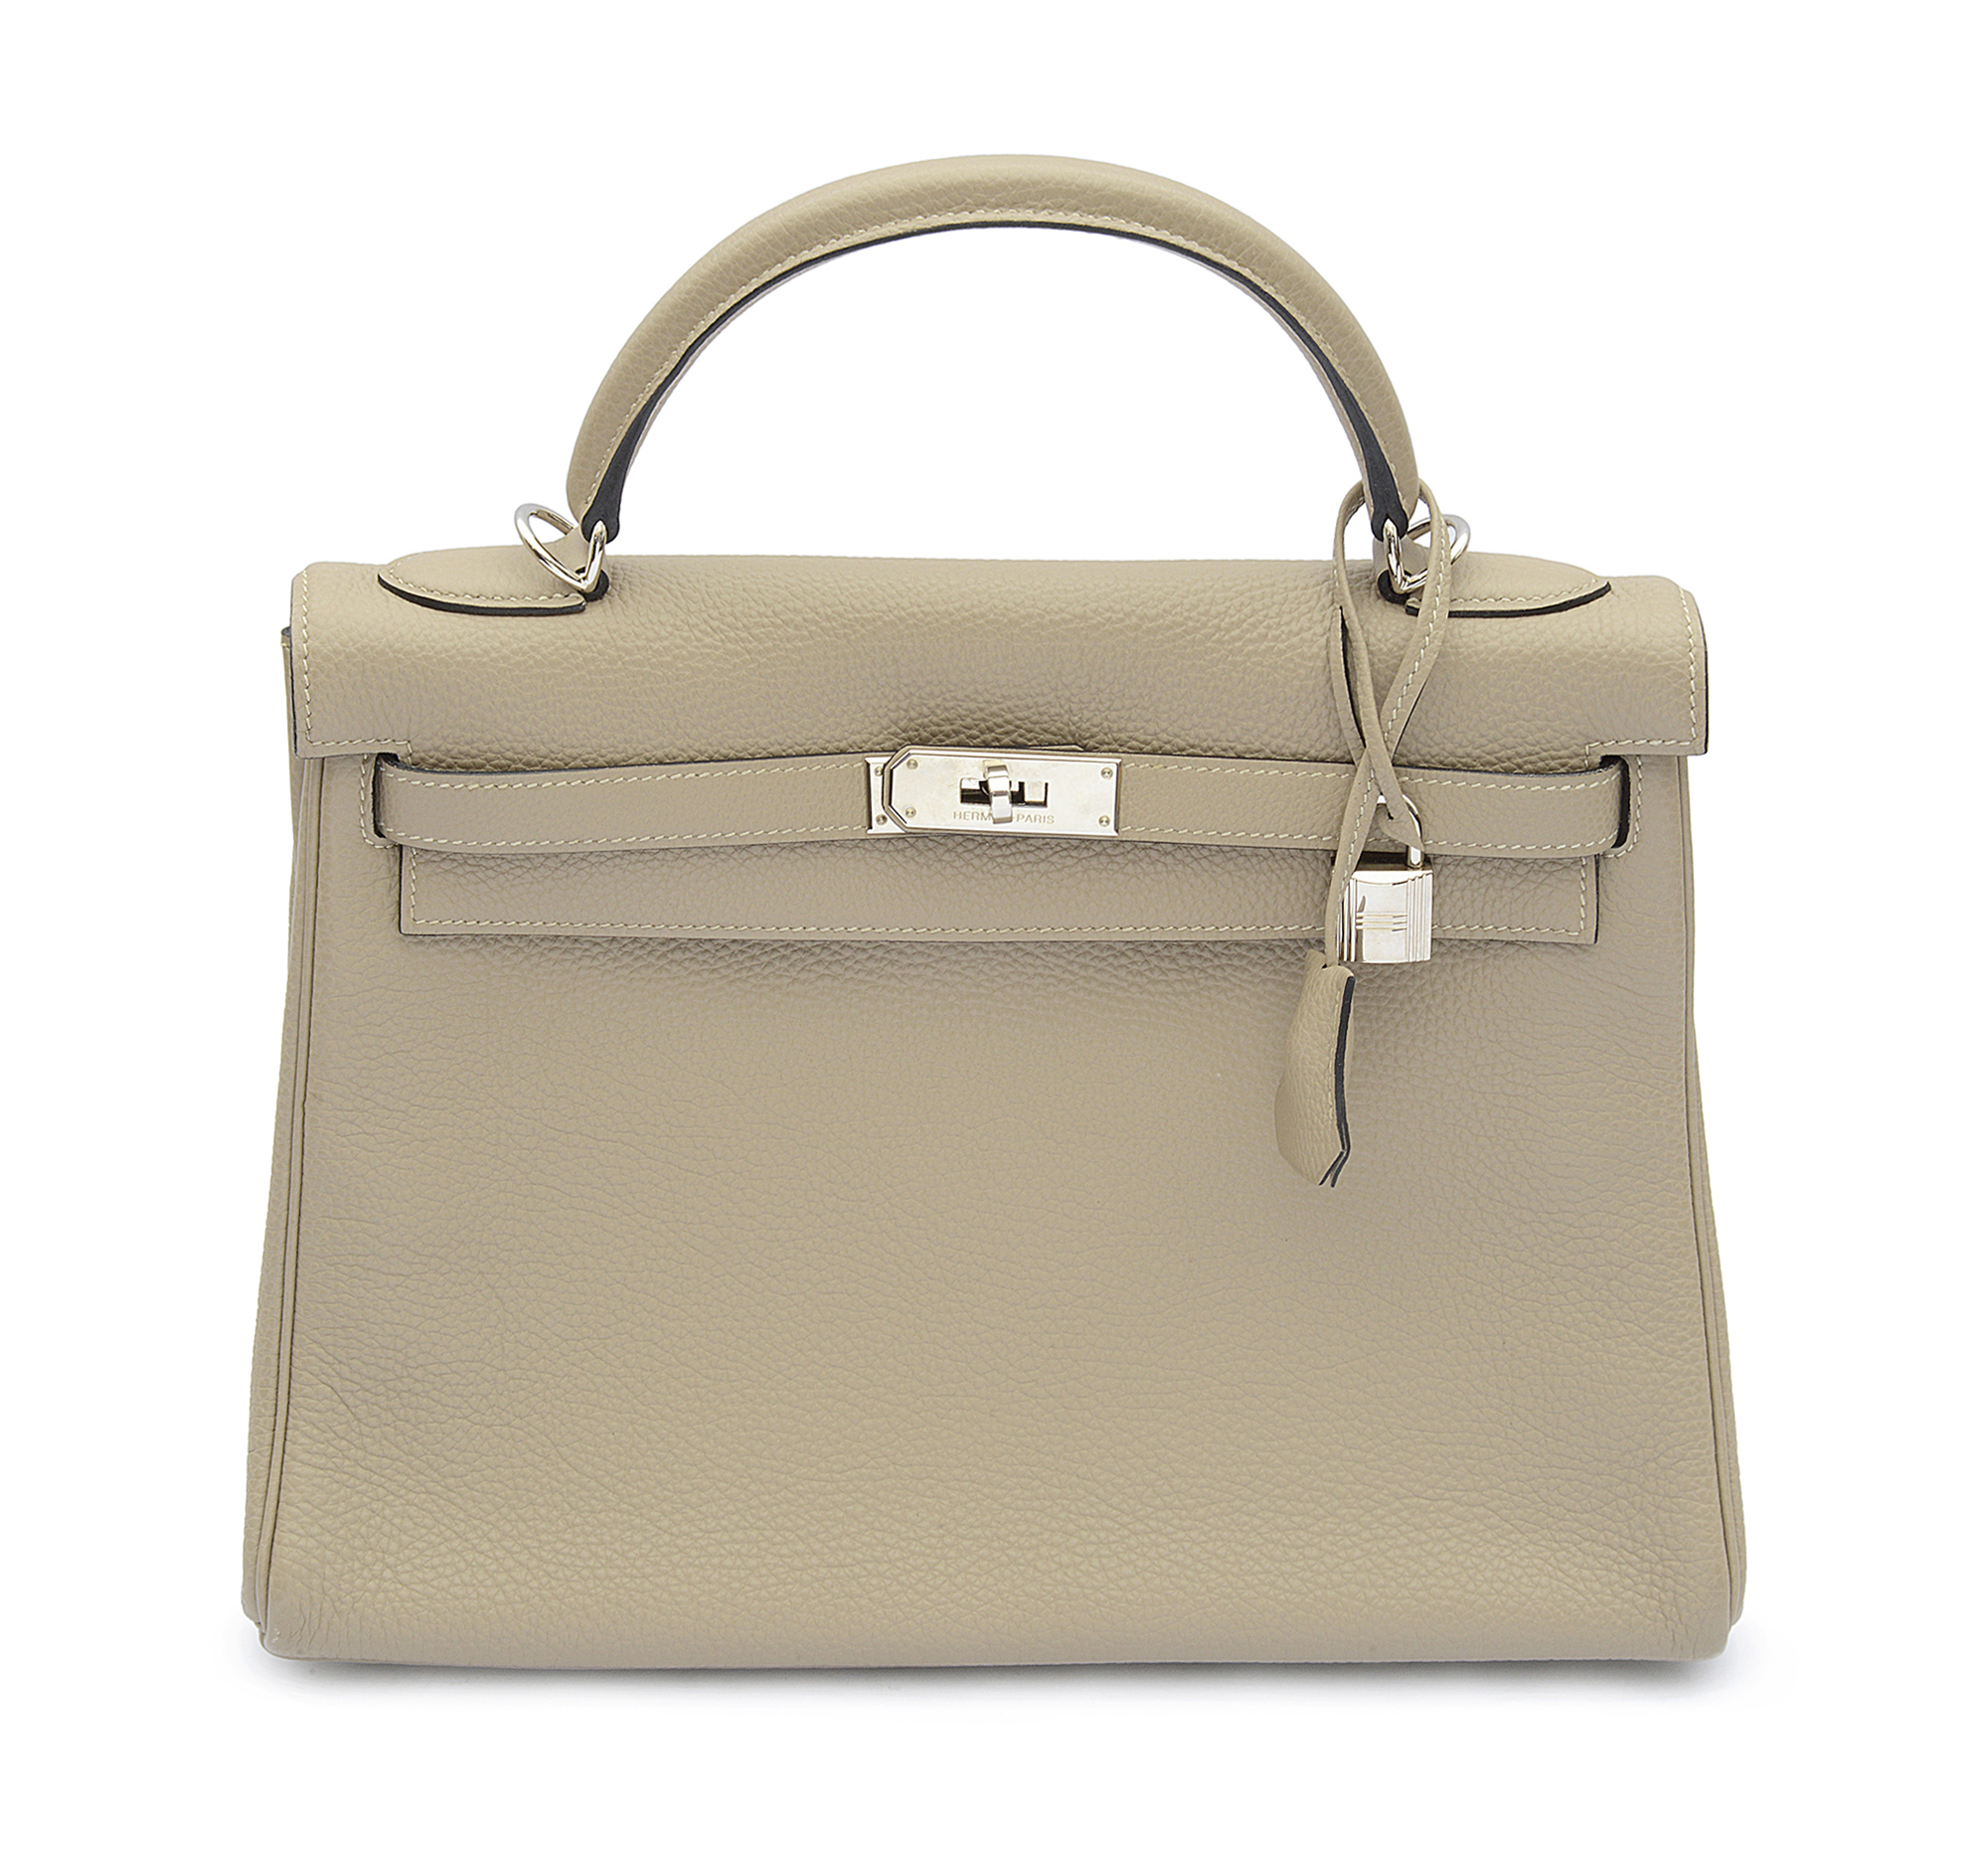 An Hermes Kelly 32 in Etoupe Epsom leather